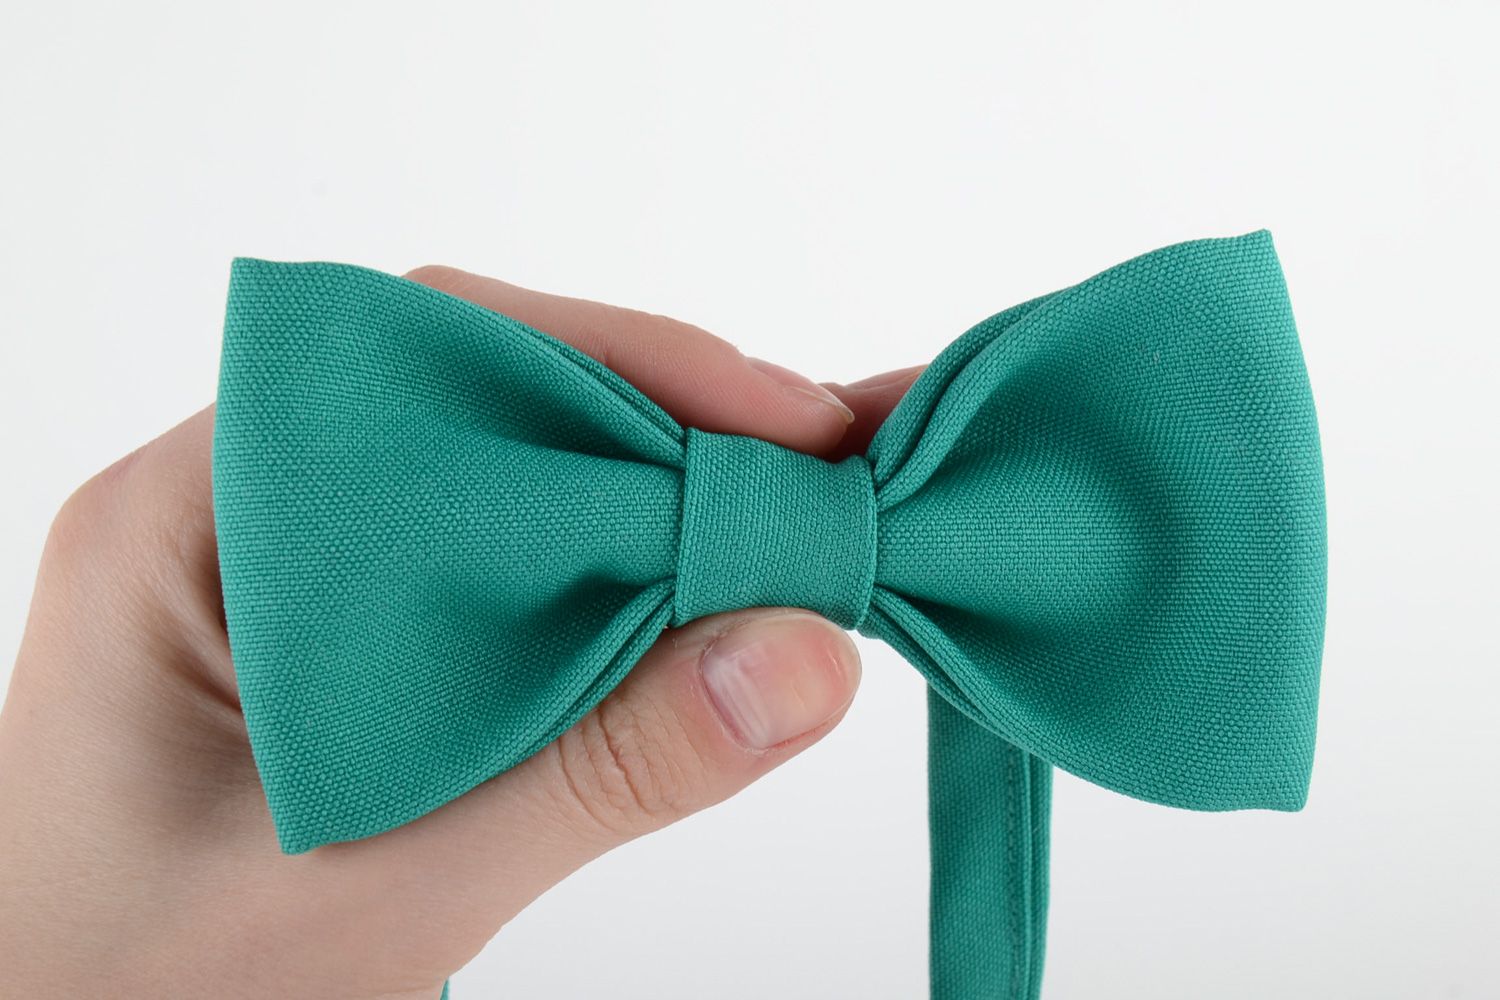 Handmade stylish bow tie sewn of costume fabric of turquoise color for men photo 5